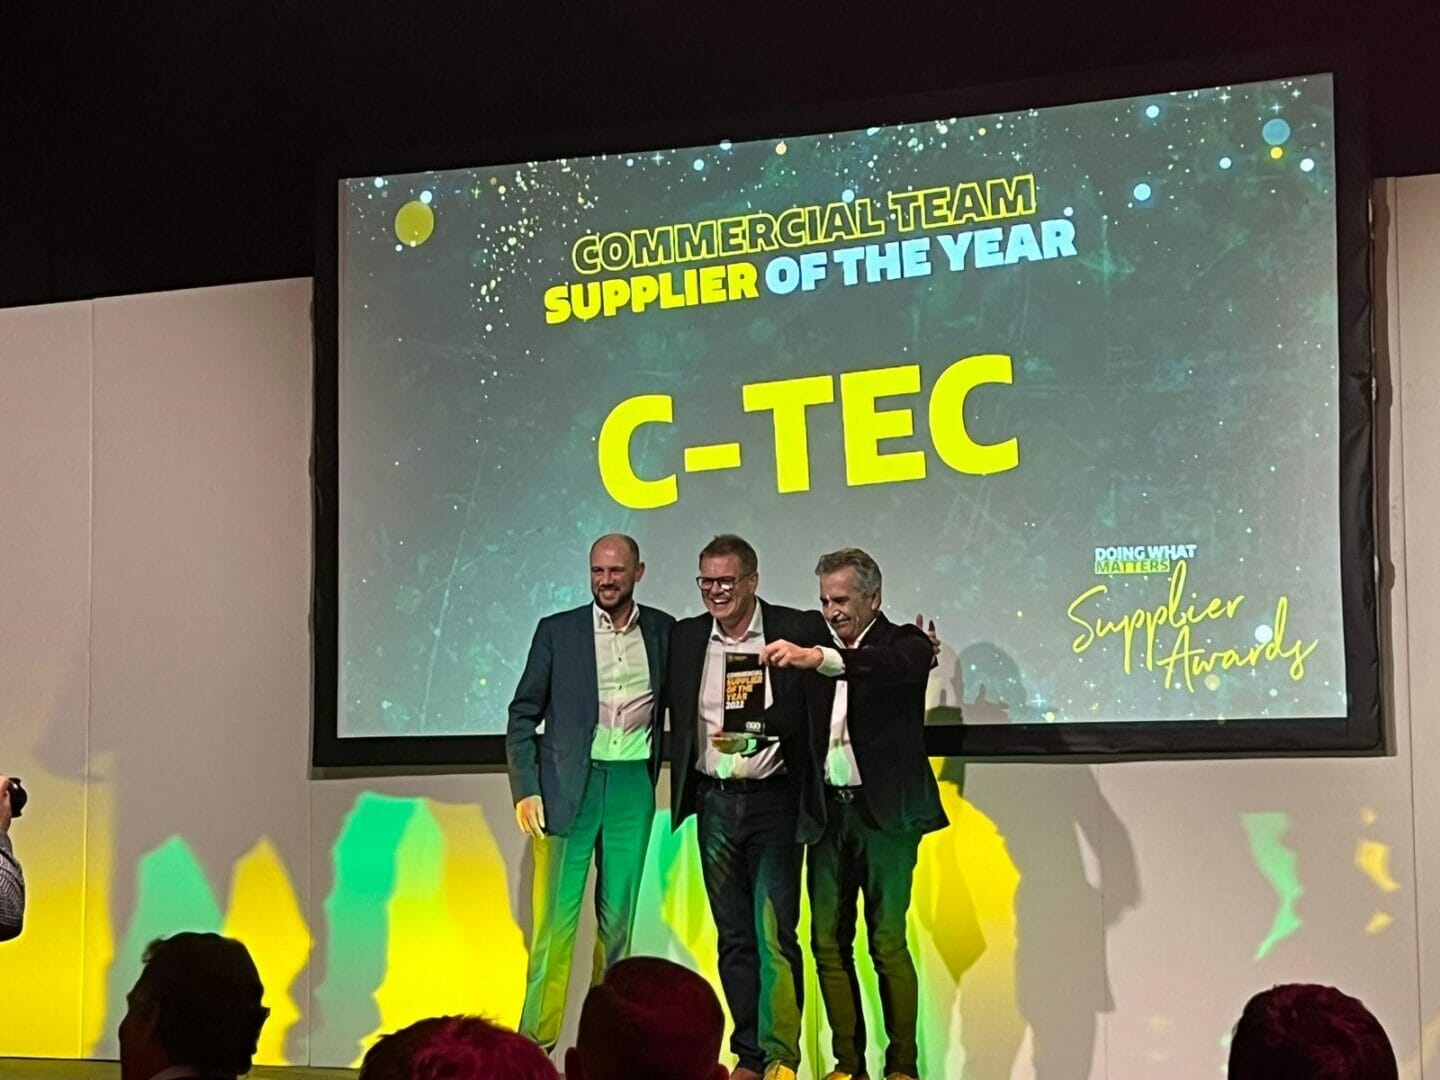 Travis Perkins Commercial Supplier of the Year – CT1 is the Award-Winning Choice!